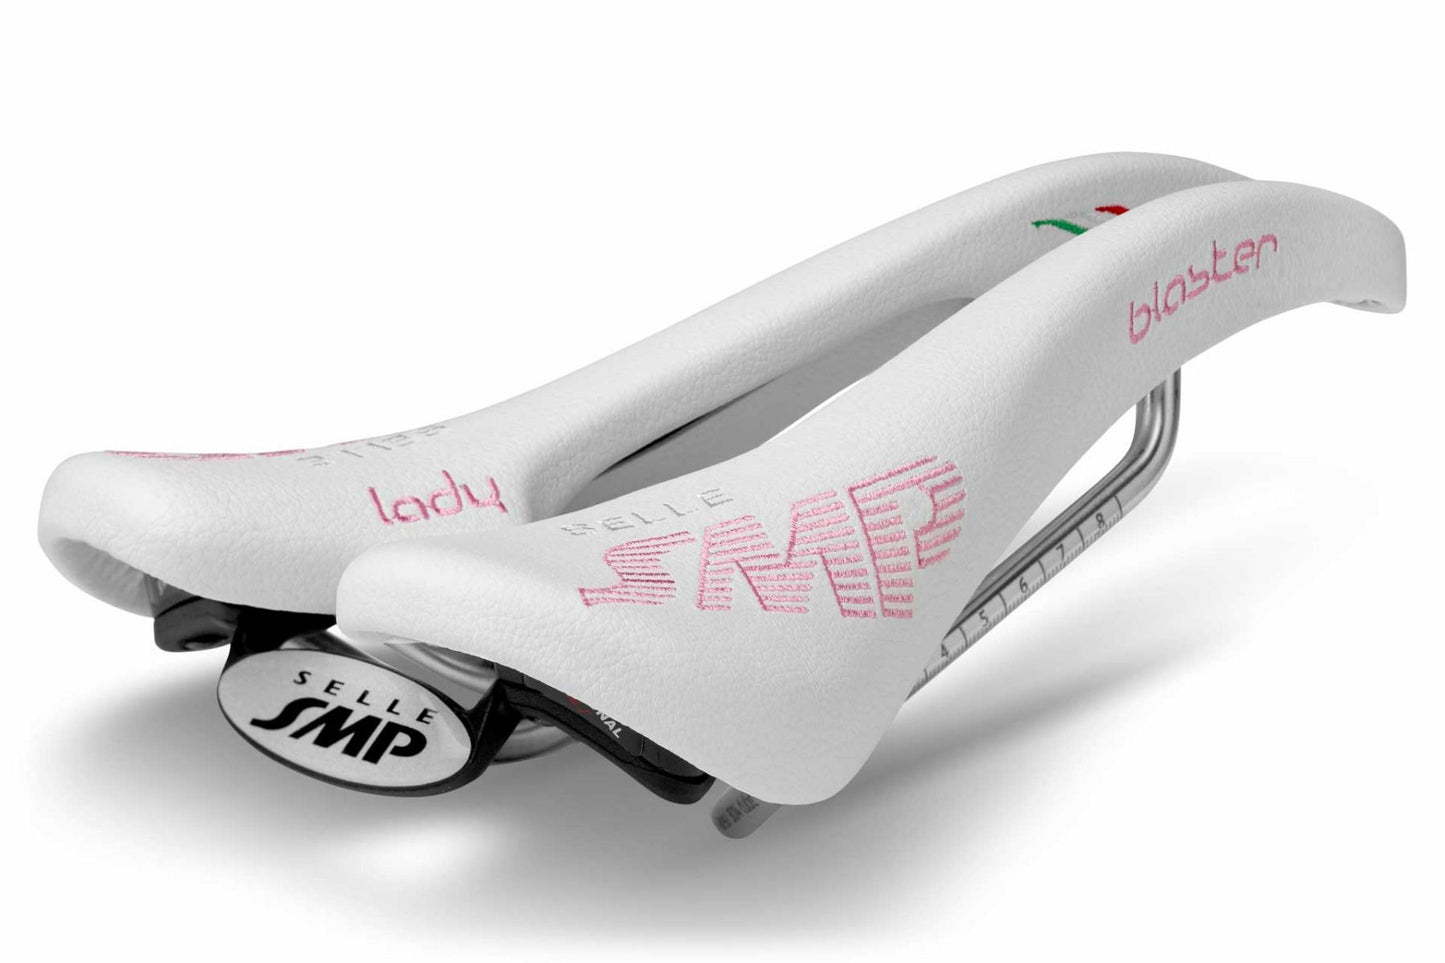 Selle SMP Blaster Saddle with Steel Rails (Lady White)